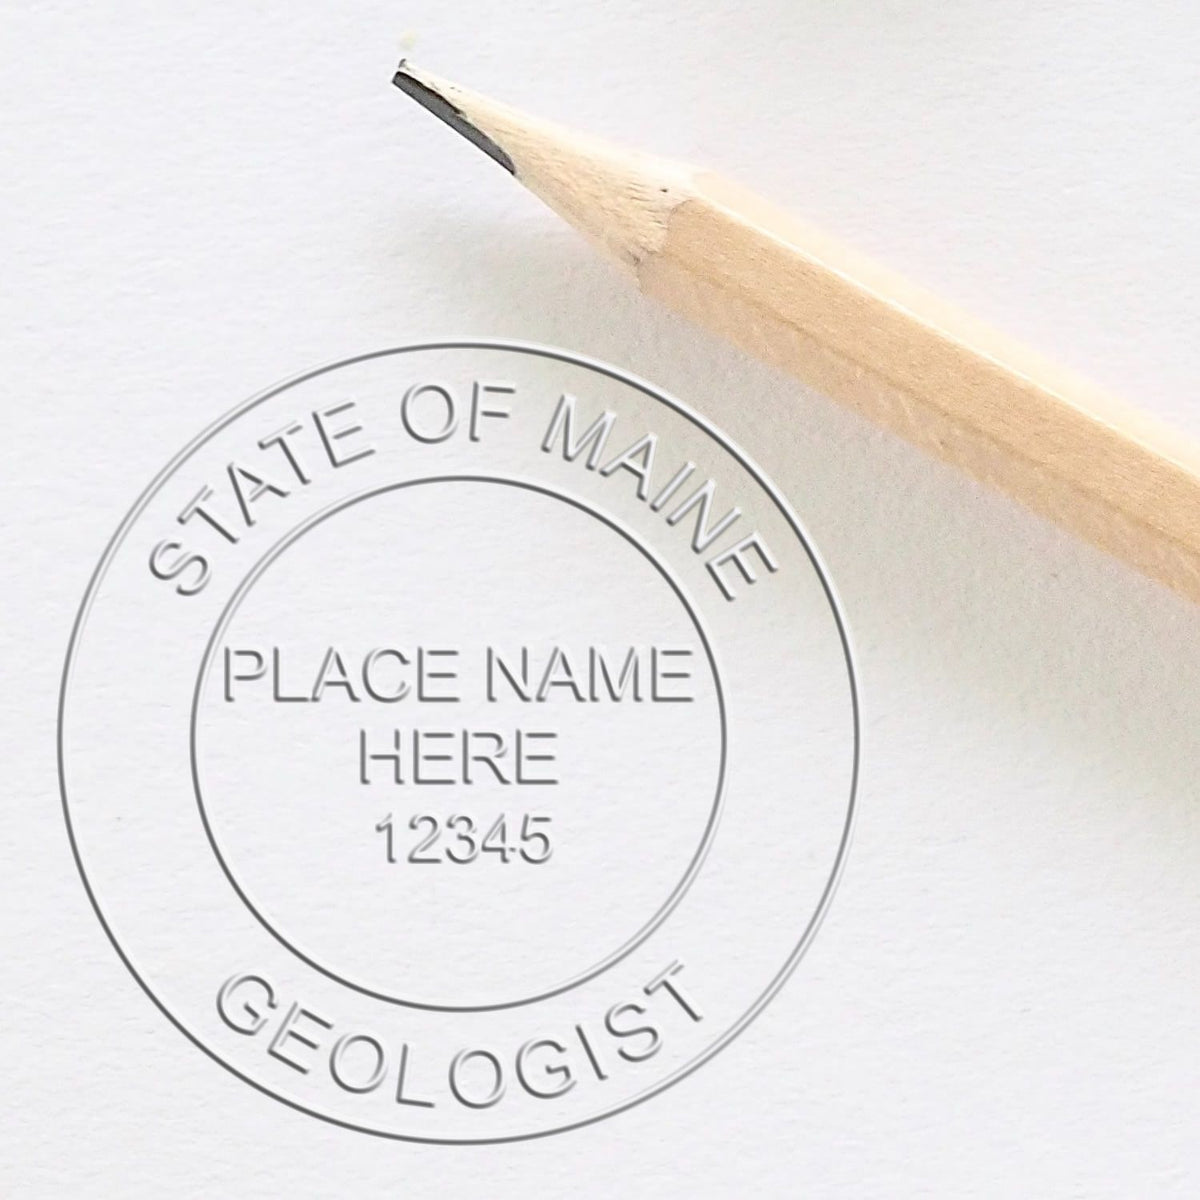 A photograph of the Soft Maine Professional Geologist Seal stamp impression reveals a vivid, professional image of the on paper.